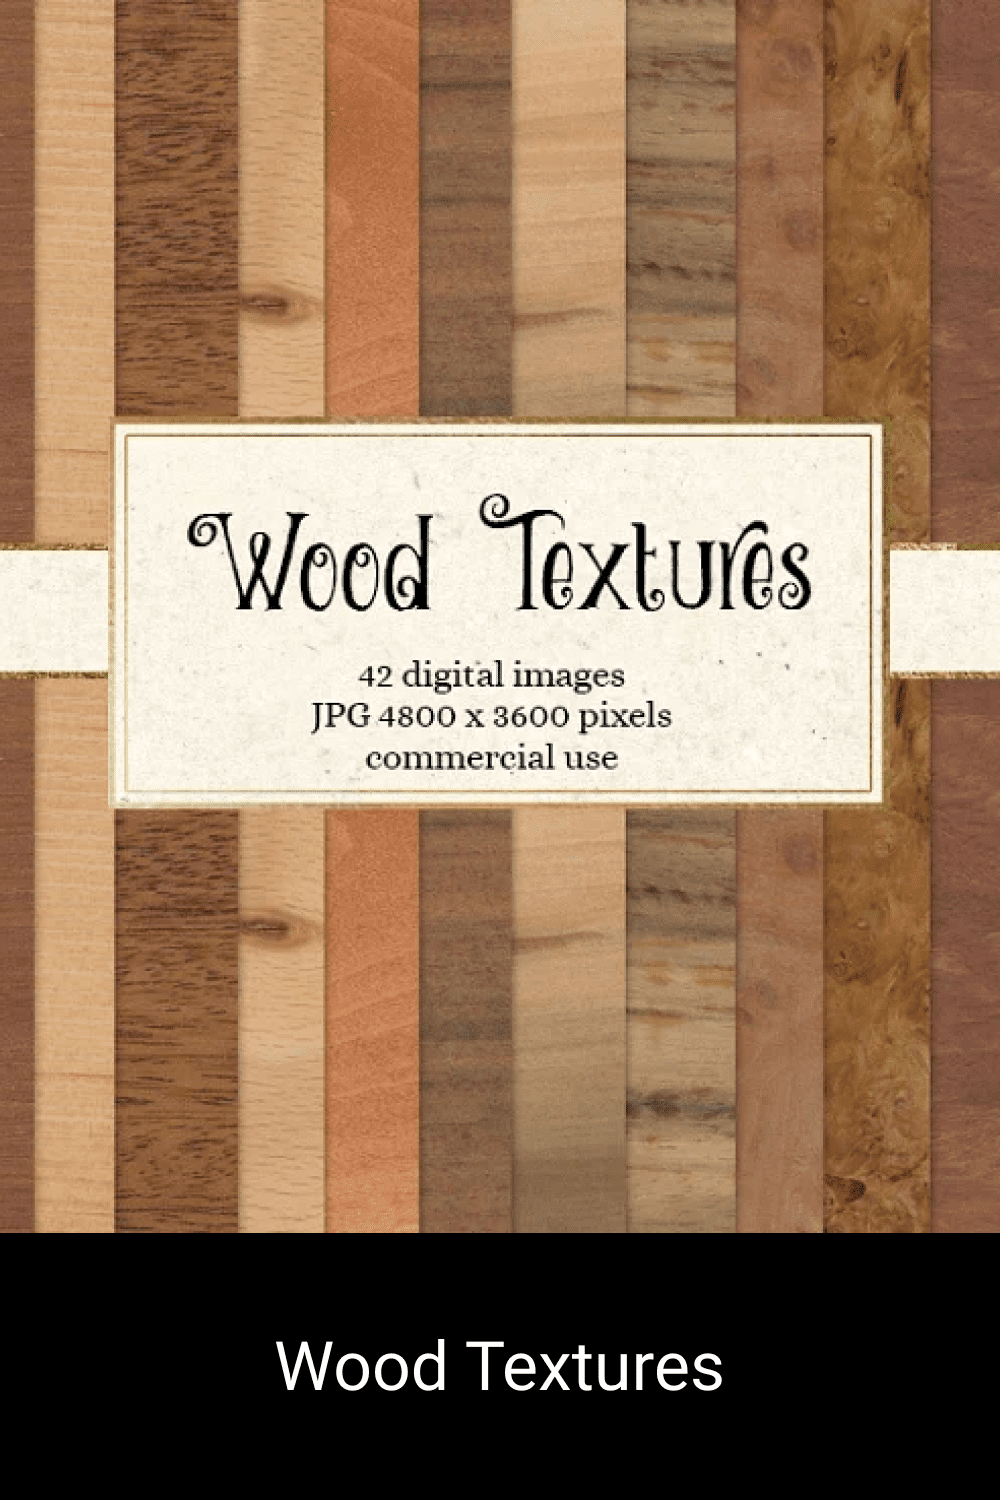 Light wooden textures collection.